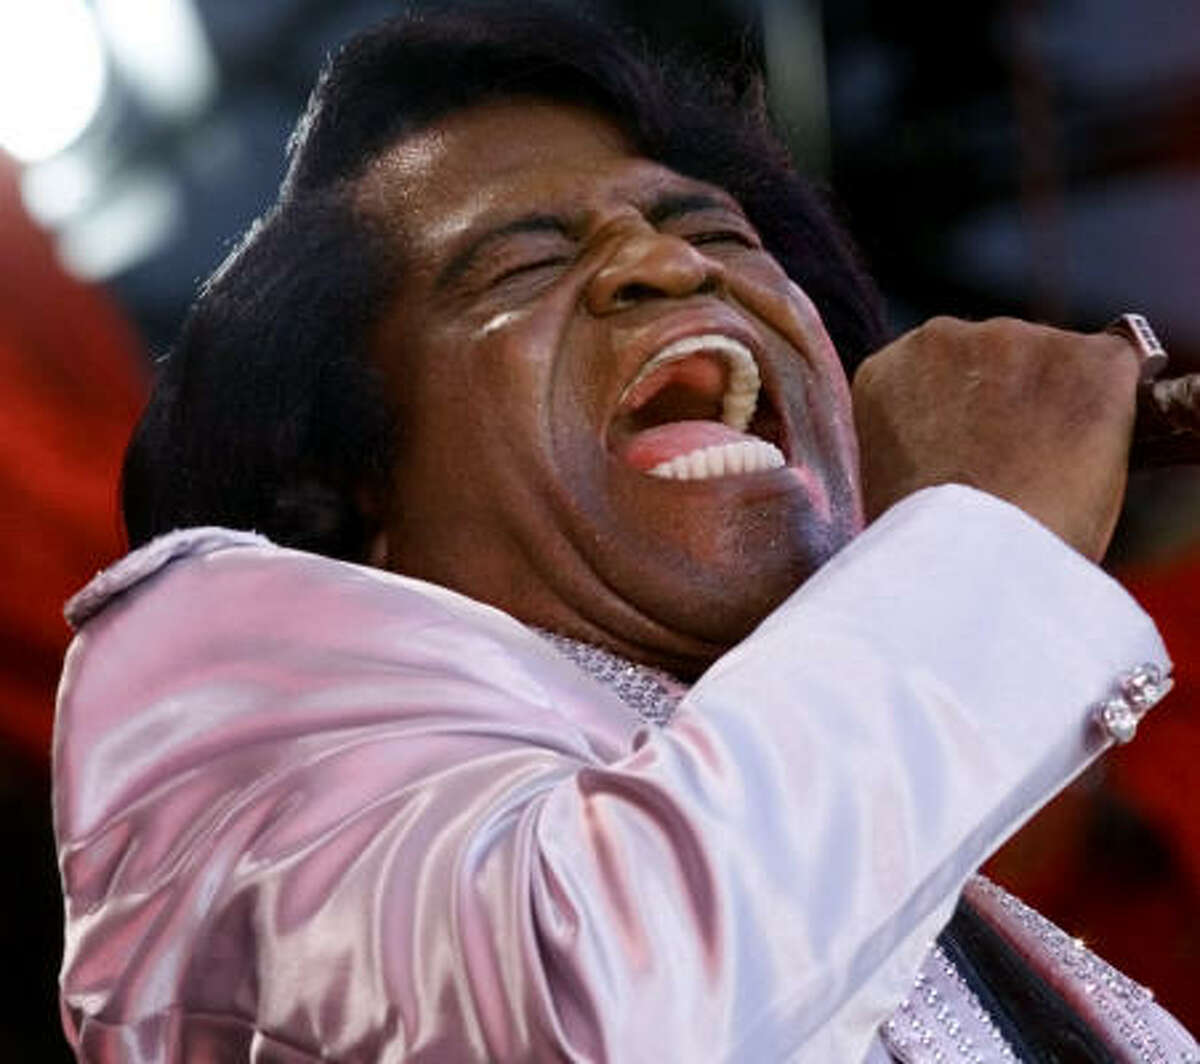 James Brown performs during the United We Stand benefit concert in 2001 in Washington's RFK Stadium.